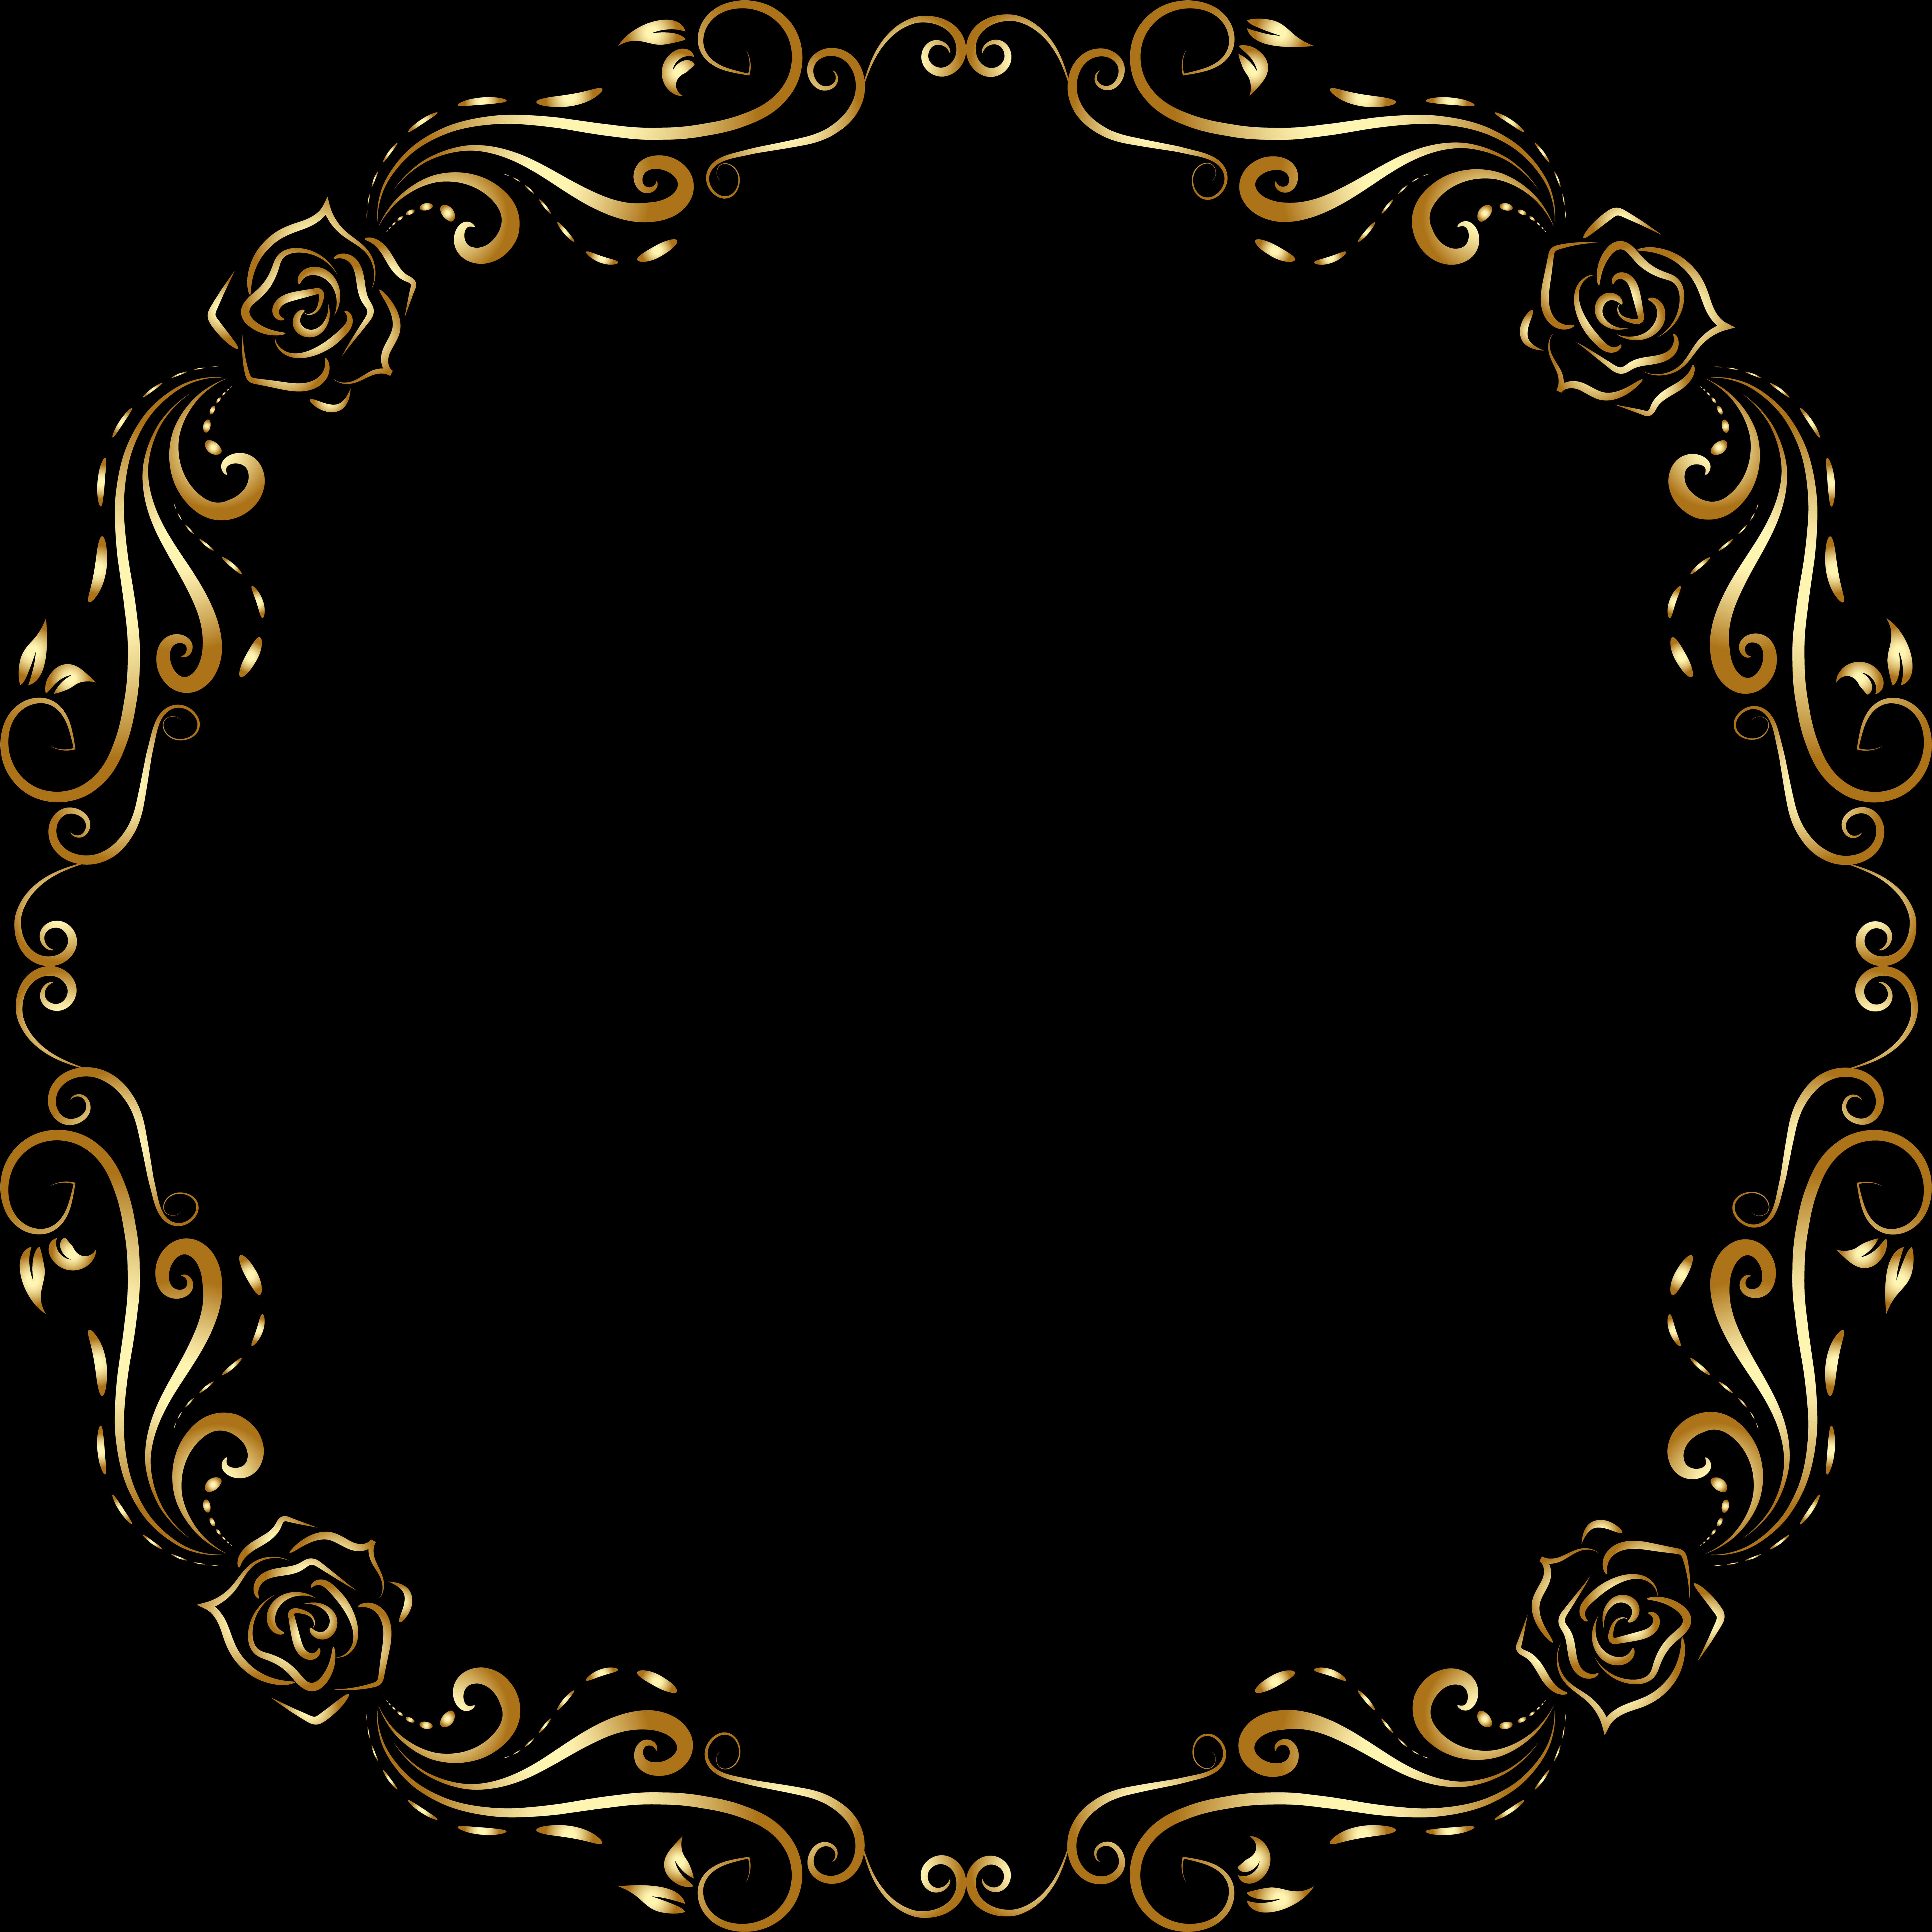 A Gold Floral Frame With Roses And Swirls